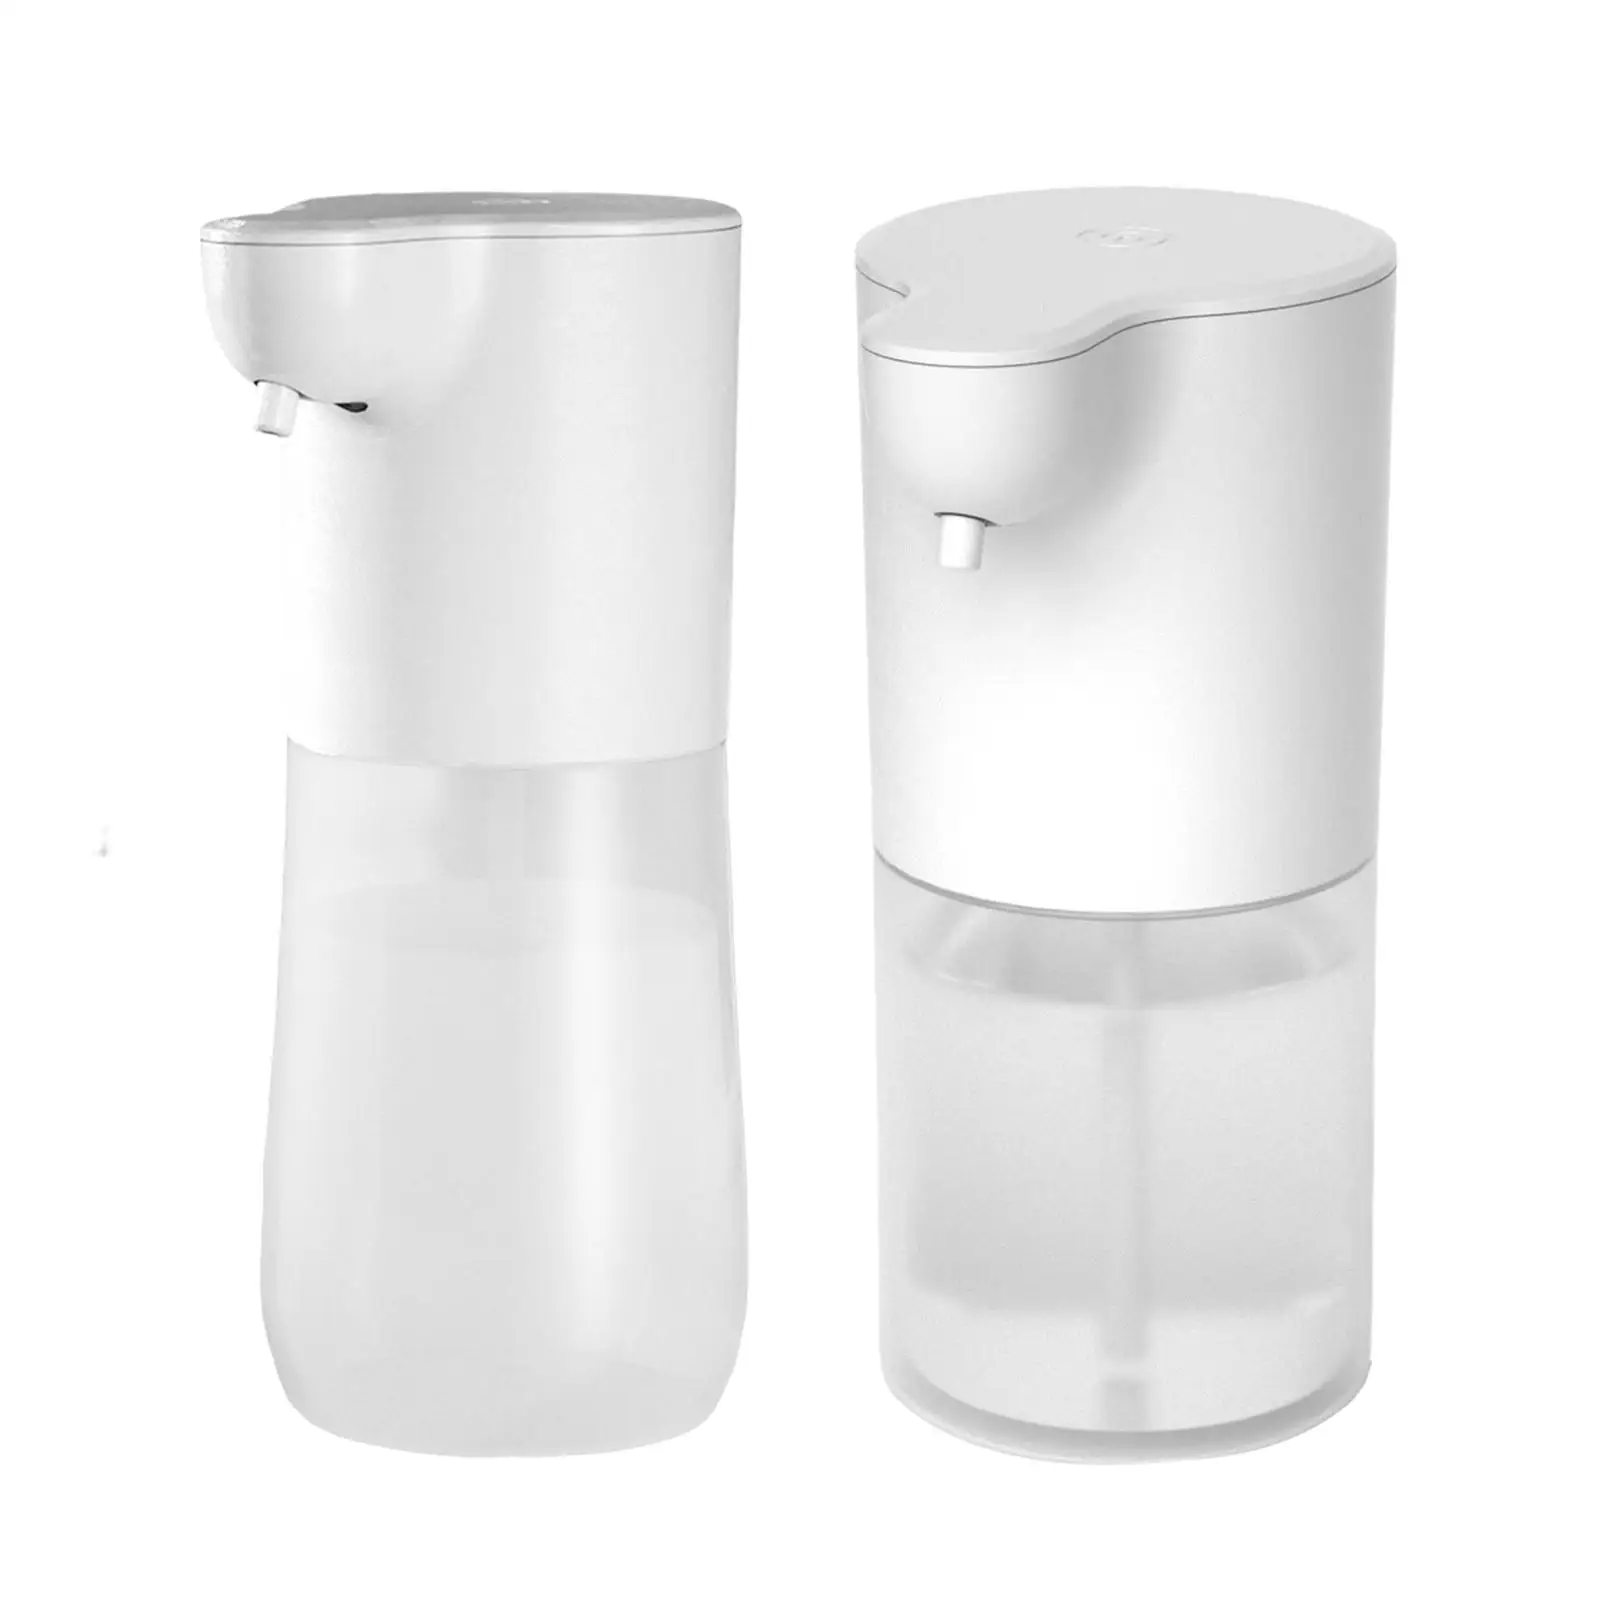 

Four Gear Switch Automatic Soap Dispensers Hand Washing Machine Desktop Foaming Touchless Soap Dispensers for Washroom Children